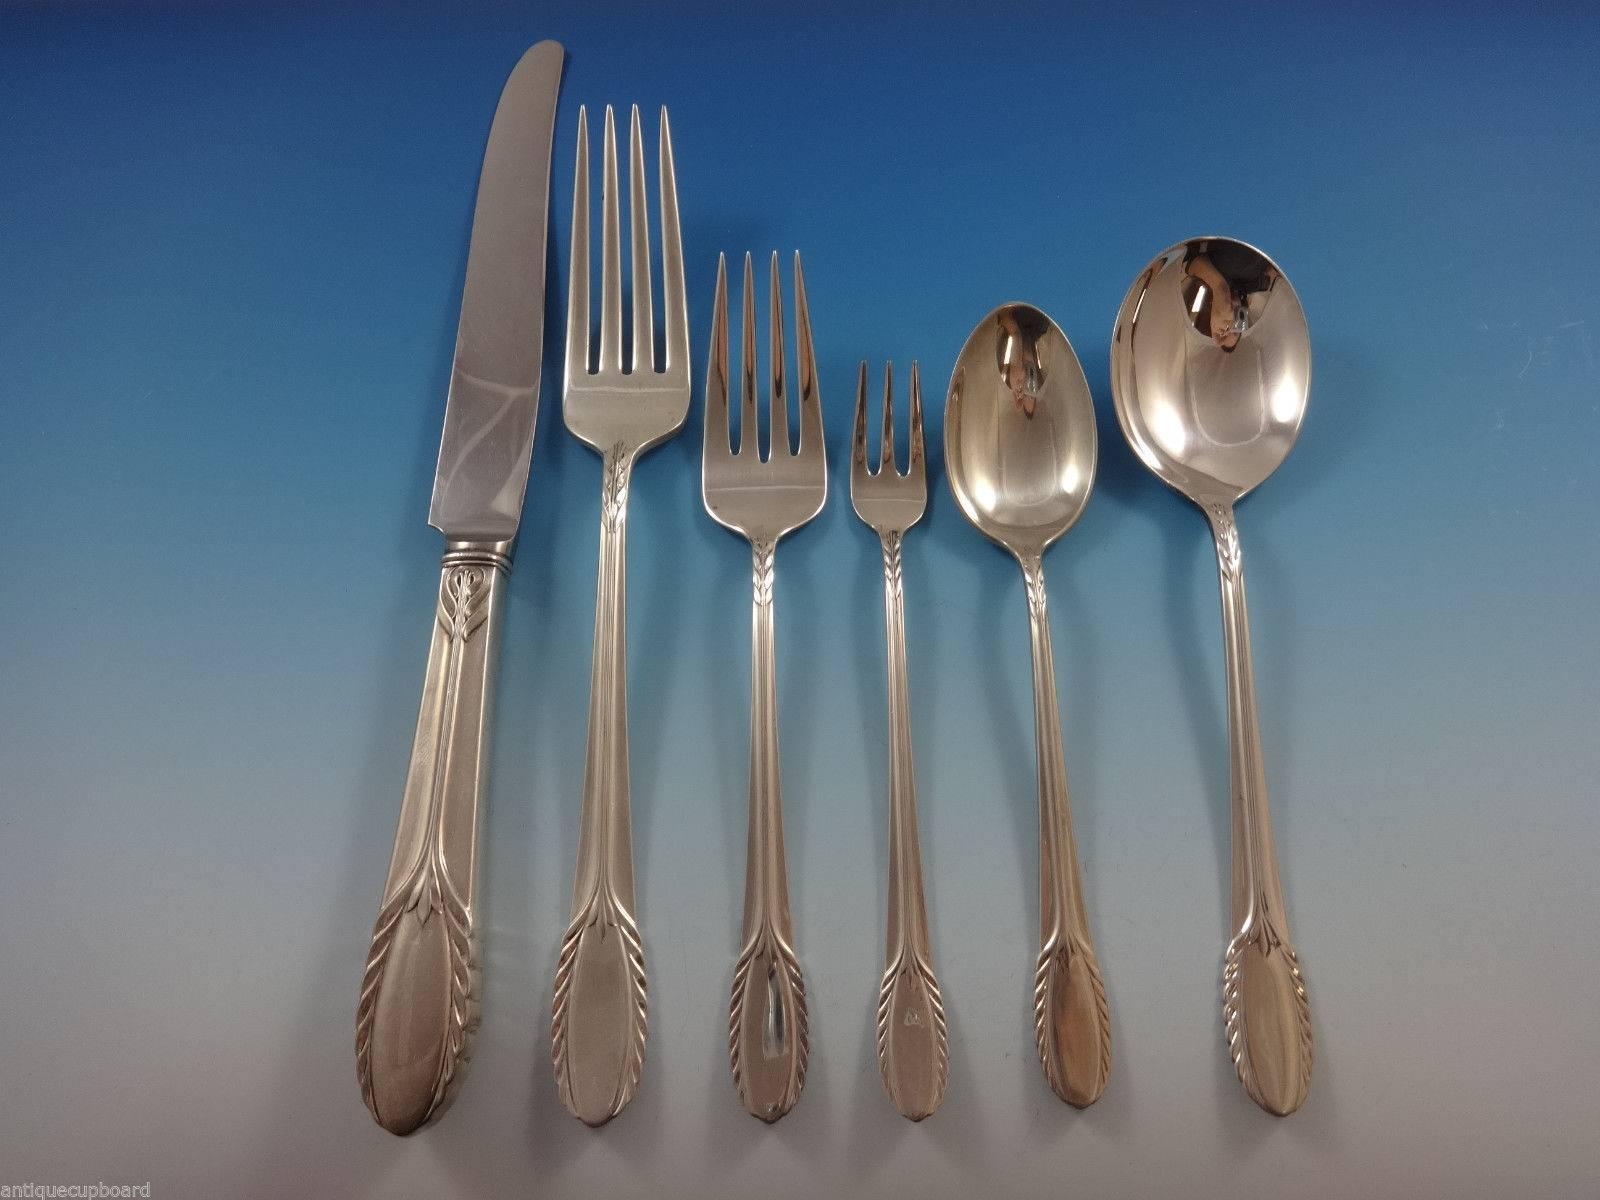 Lovely Trousseau by International sterling silver dinner size flatware set - 53 pieces. This set includes:

Eight dinner size knives, 9 5/8